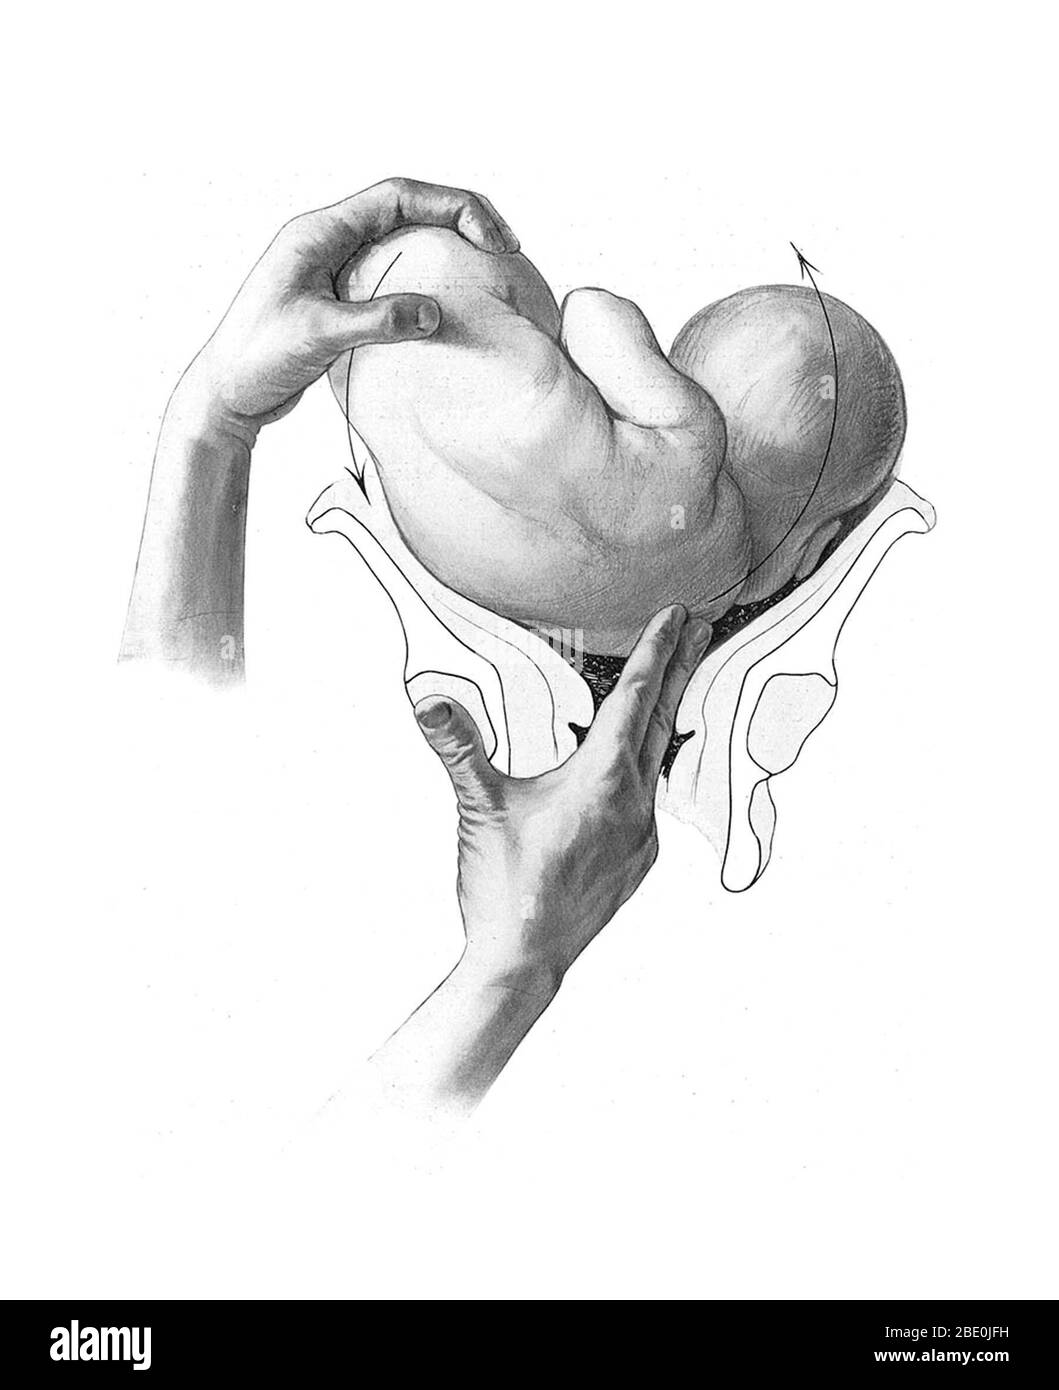 The position of the child is important for normal birthing procedure: head-first birth is preferred. Birth trauma (BT) refers to damage of the tissues and organs of a newly delivered child, often as a result of physical pressure or trauma during childbirth. The term also encompasses the long term consequences, often of a cognitive nature, of damage to the brain or cranium. Medical study of birth trauma dates to the 16th century, and the morphological consequences of mishandled delivery are described in Renaissance-era medical literature. Illustration from Grundriss zum Studium der Geburtshülfe Stock Photo